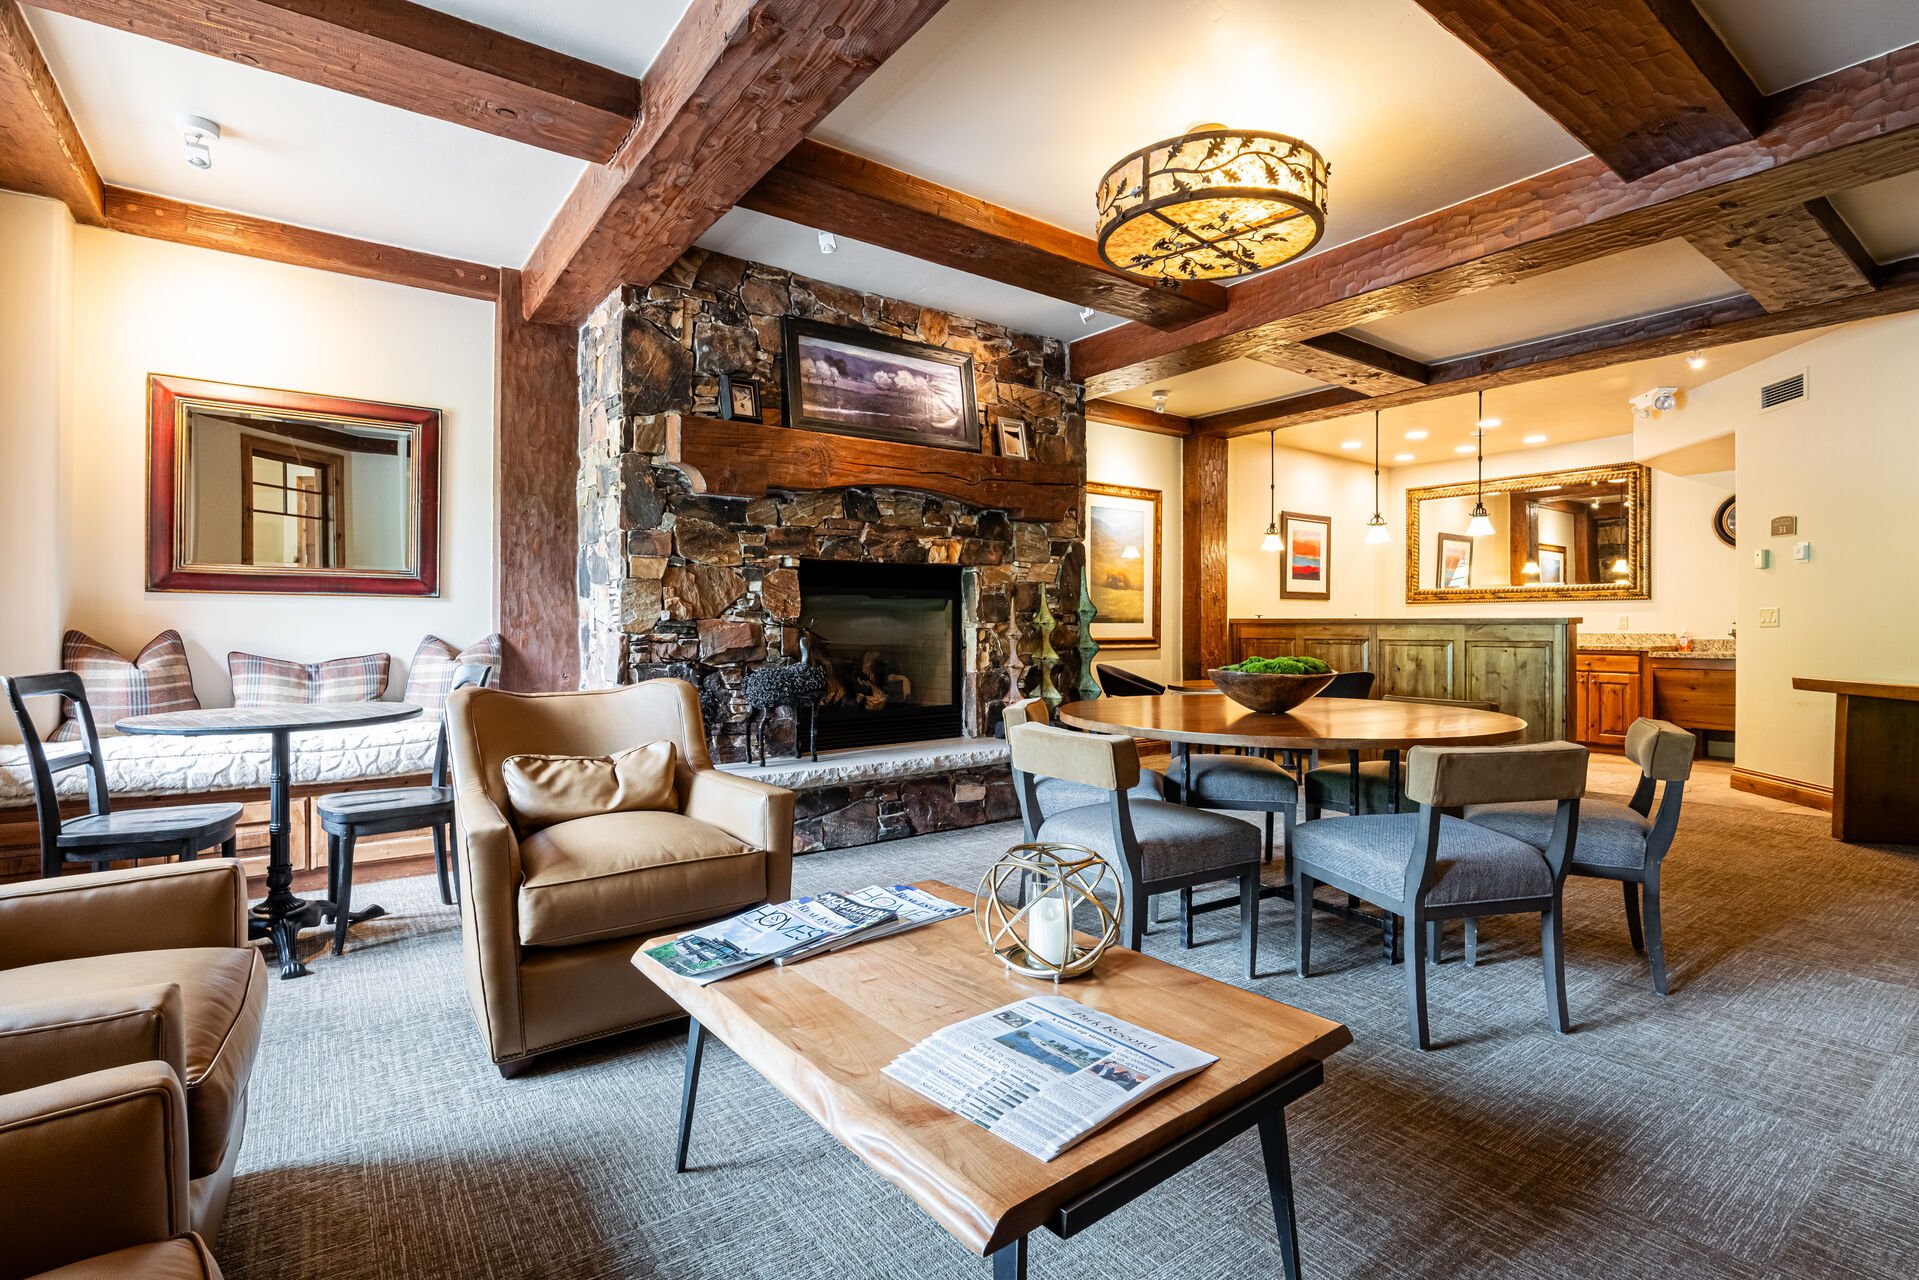 Skier's Lounge with direct access to ski run and chairlift